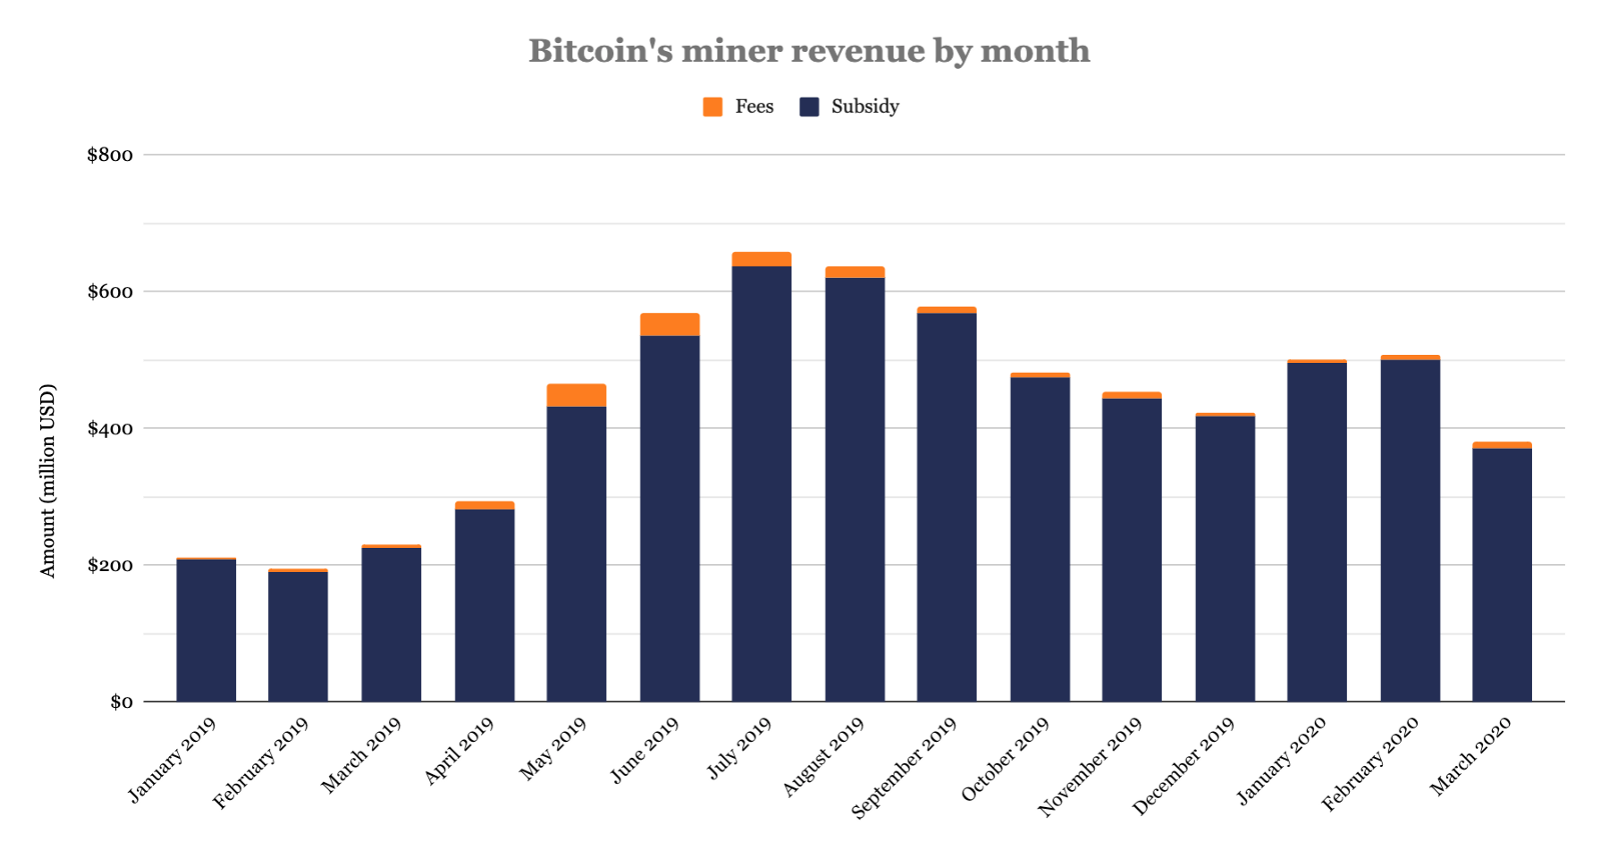 In March, the income of bitcoin miners fell by 25%